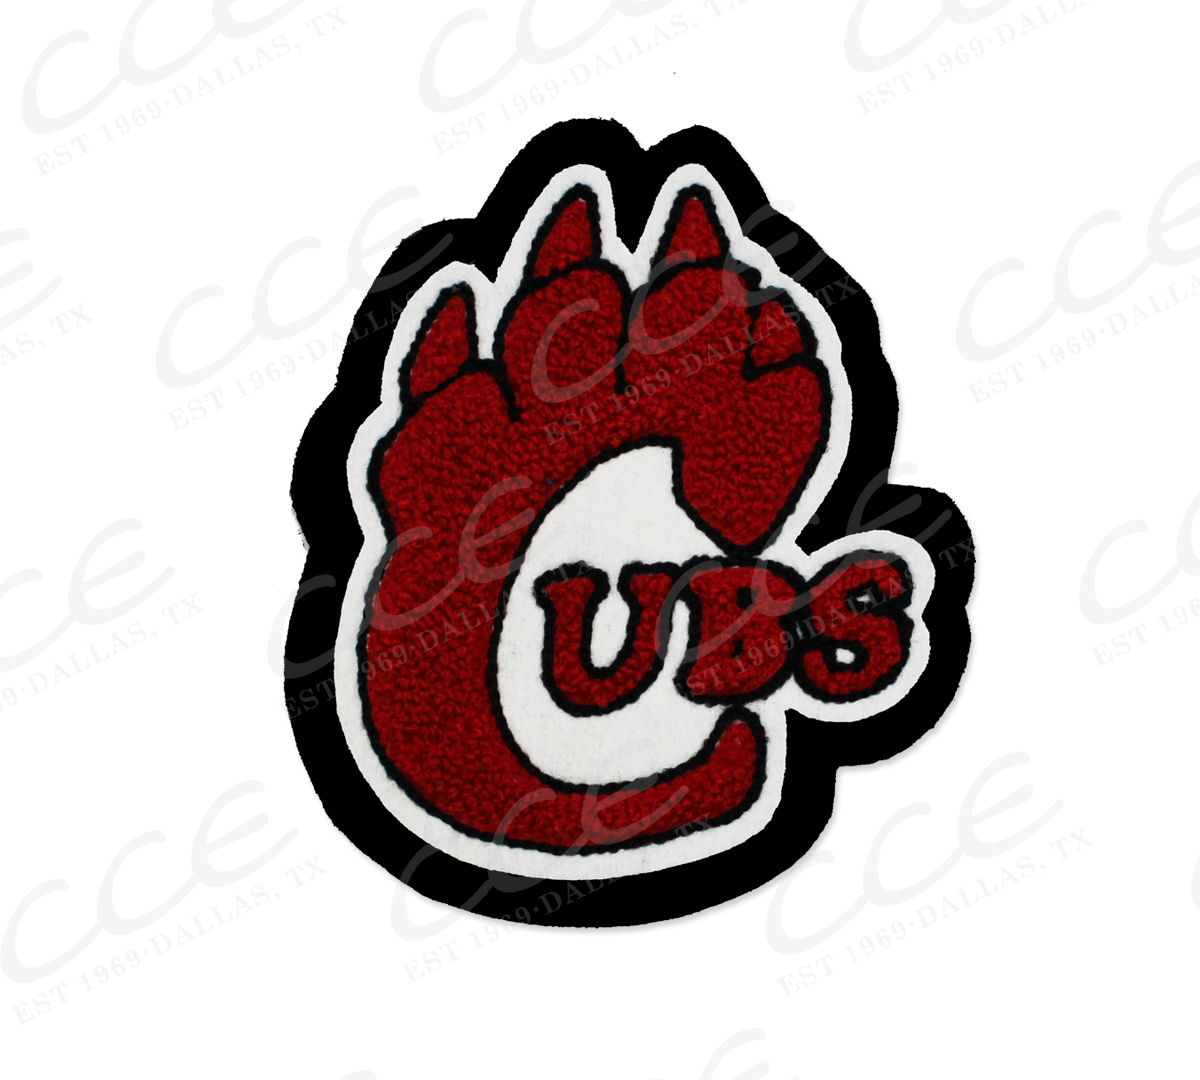 Brownfield HS Cubs Mascot